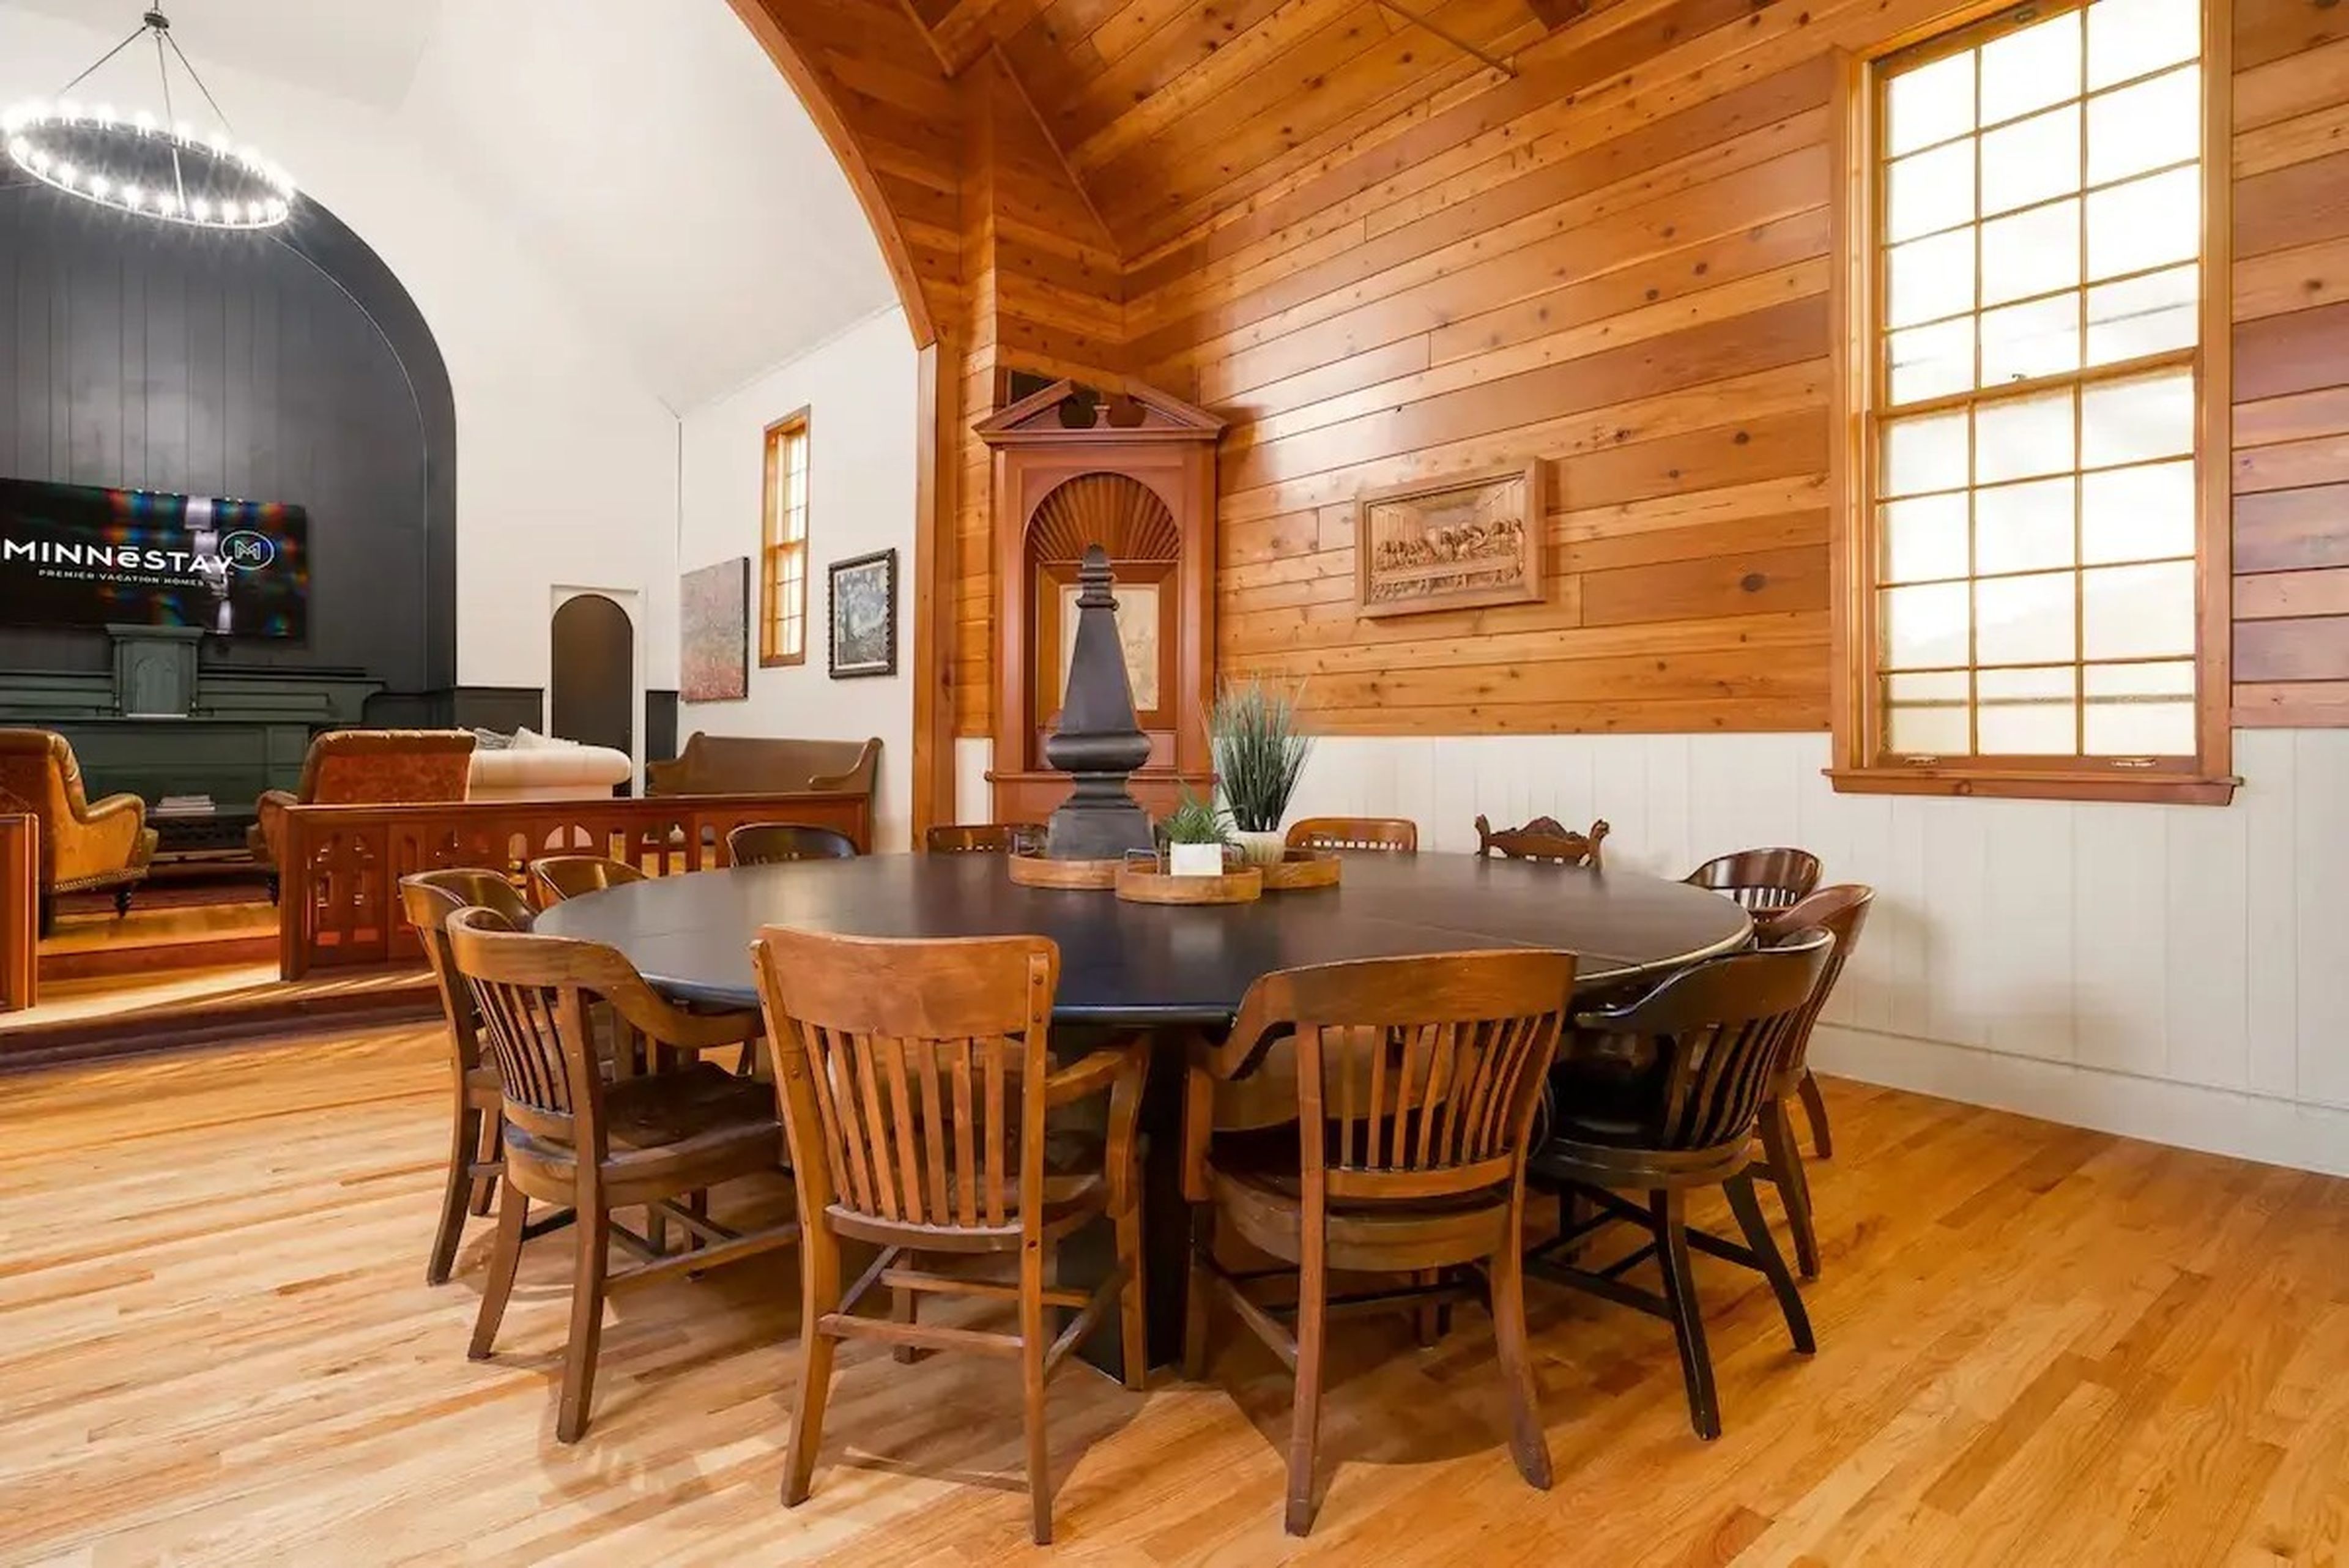 A room with wood walls and a large round table surrounded by many chairs.